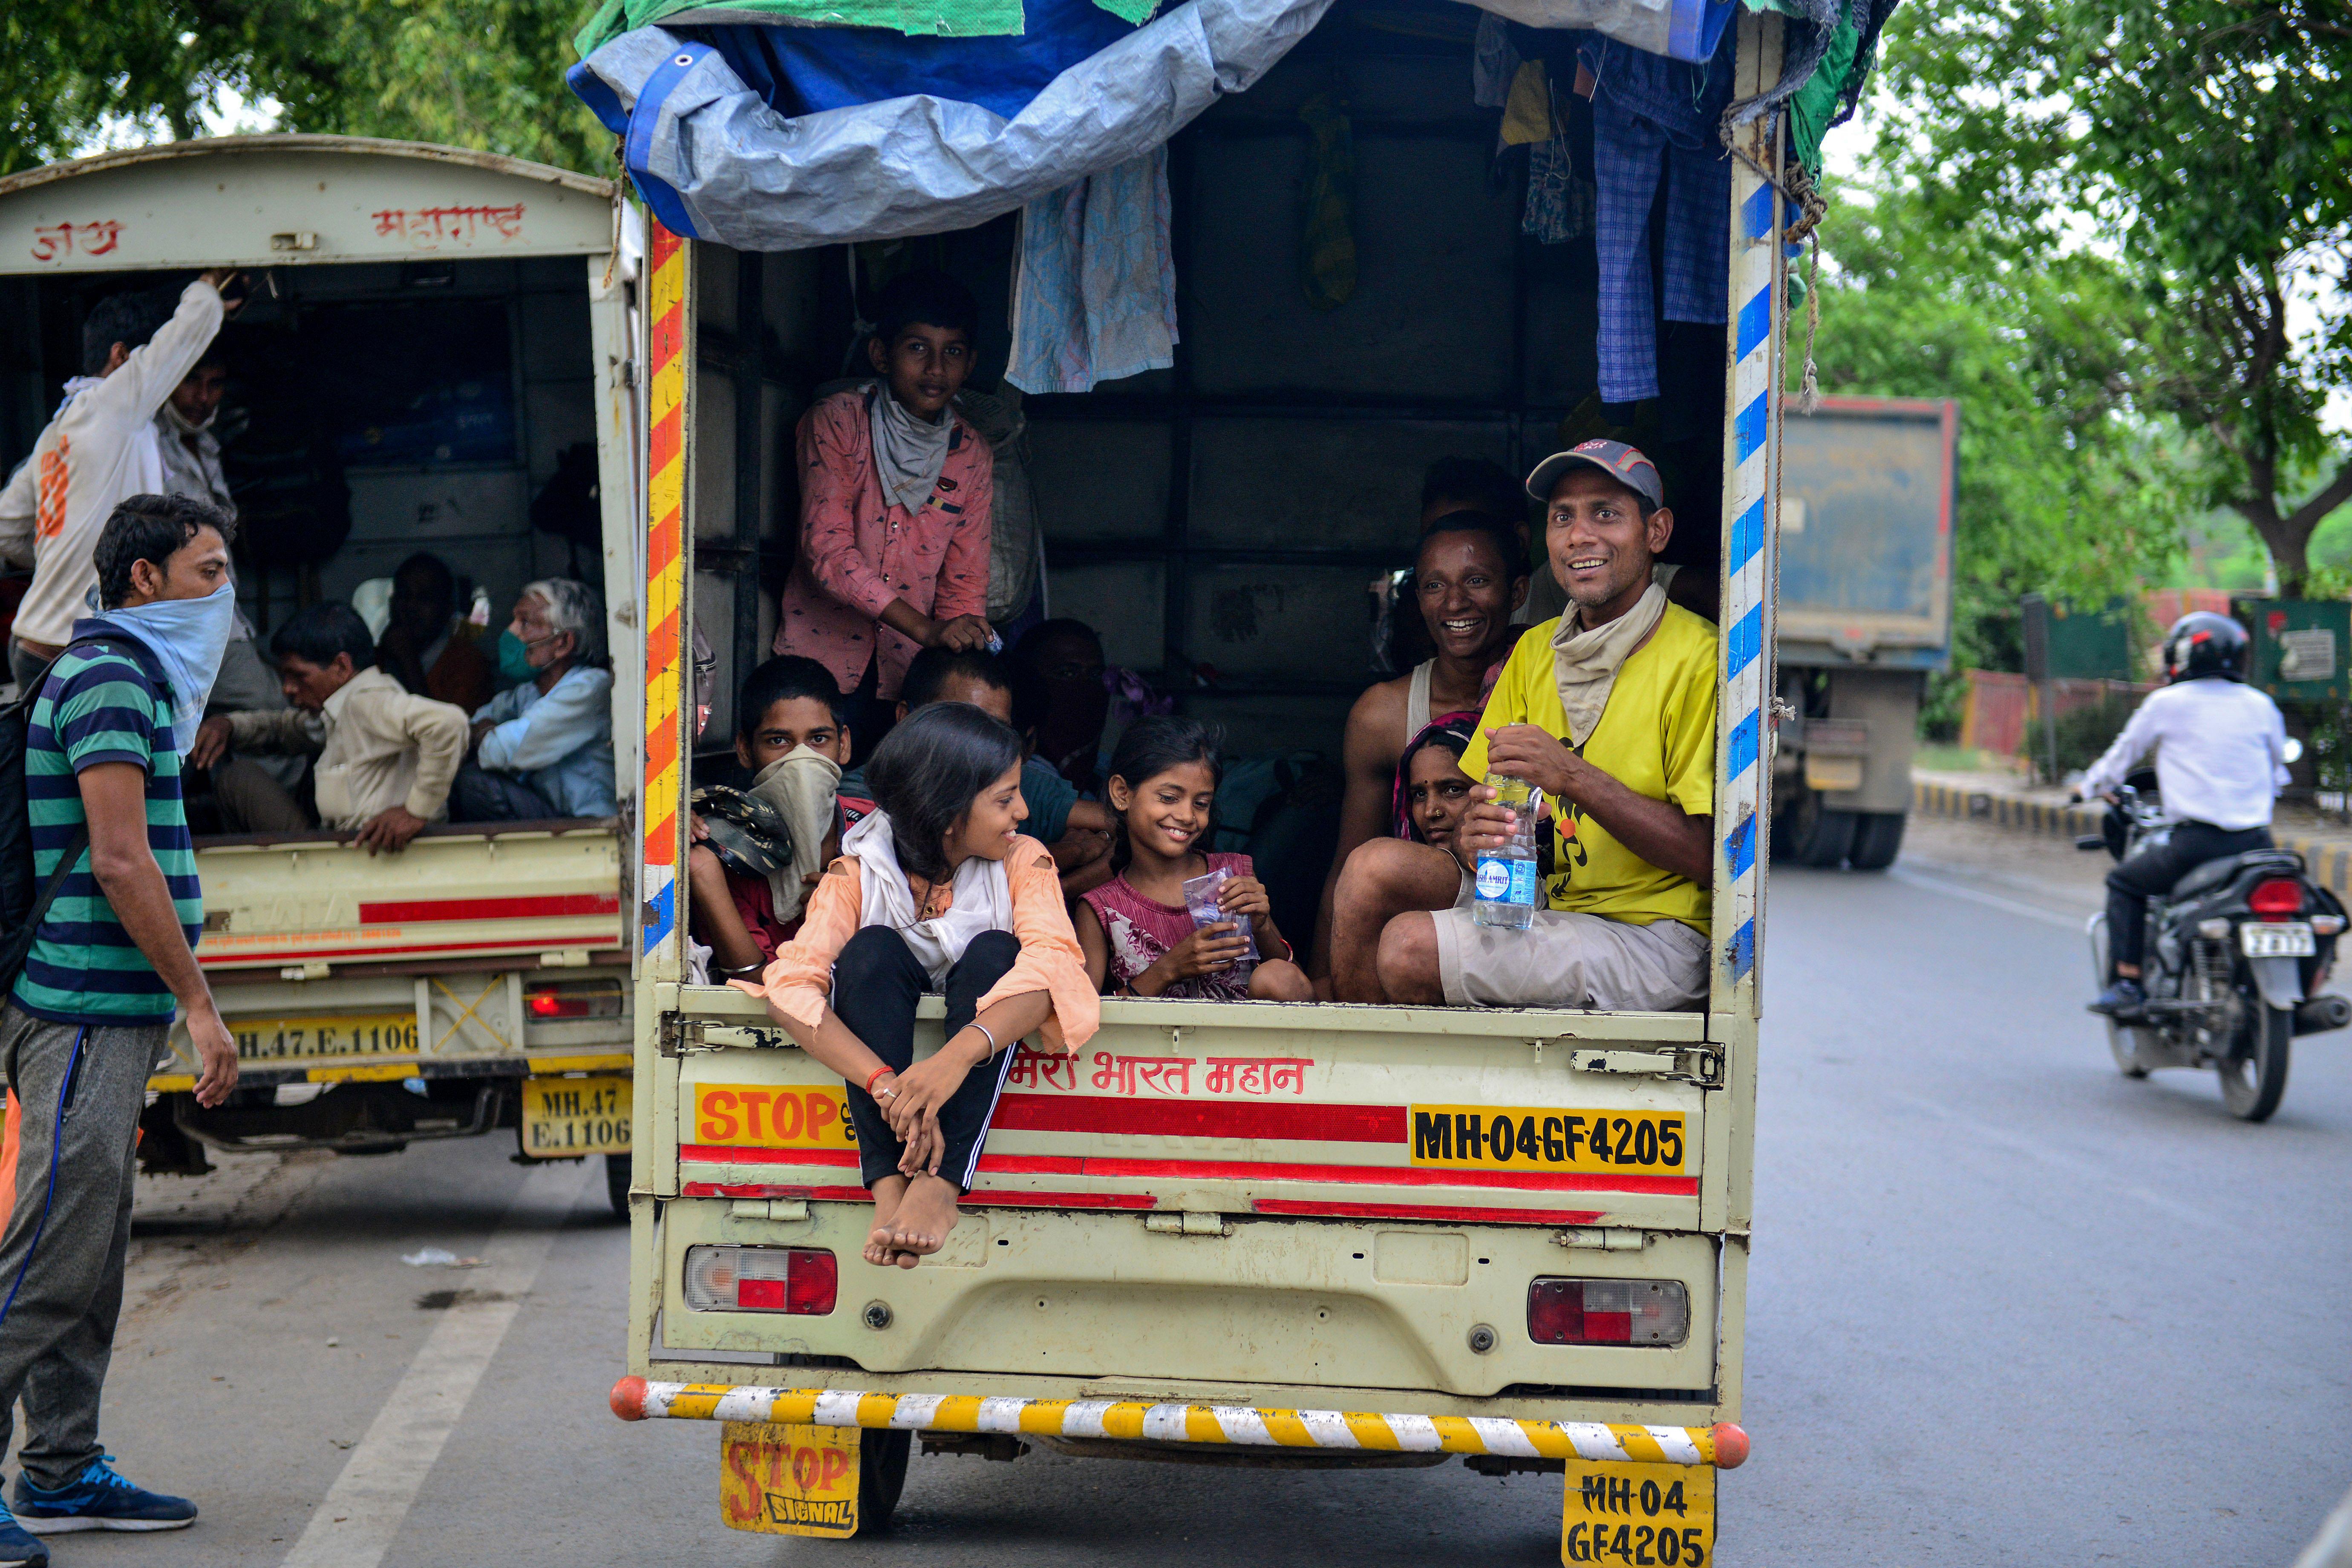 Adults and children, some wearing face coverings, sit in the back of a truck.